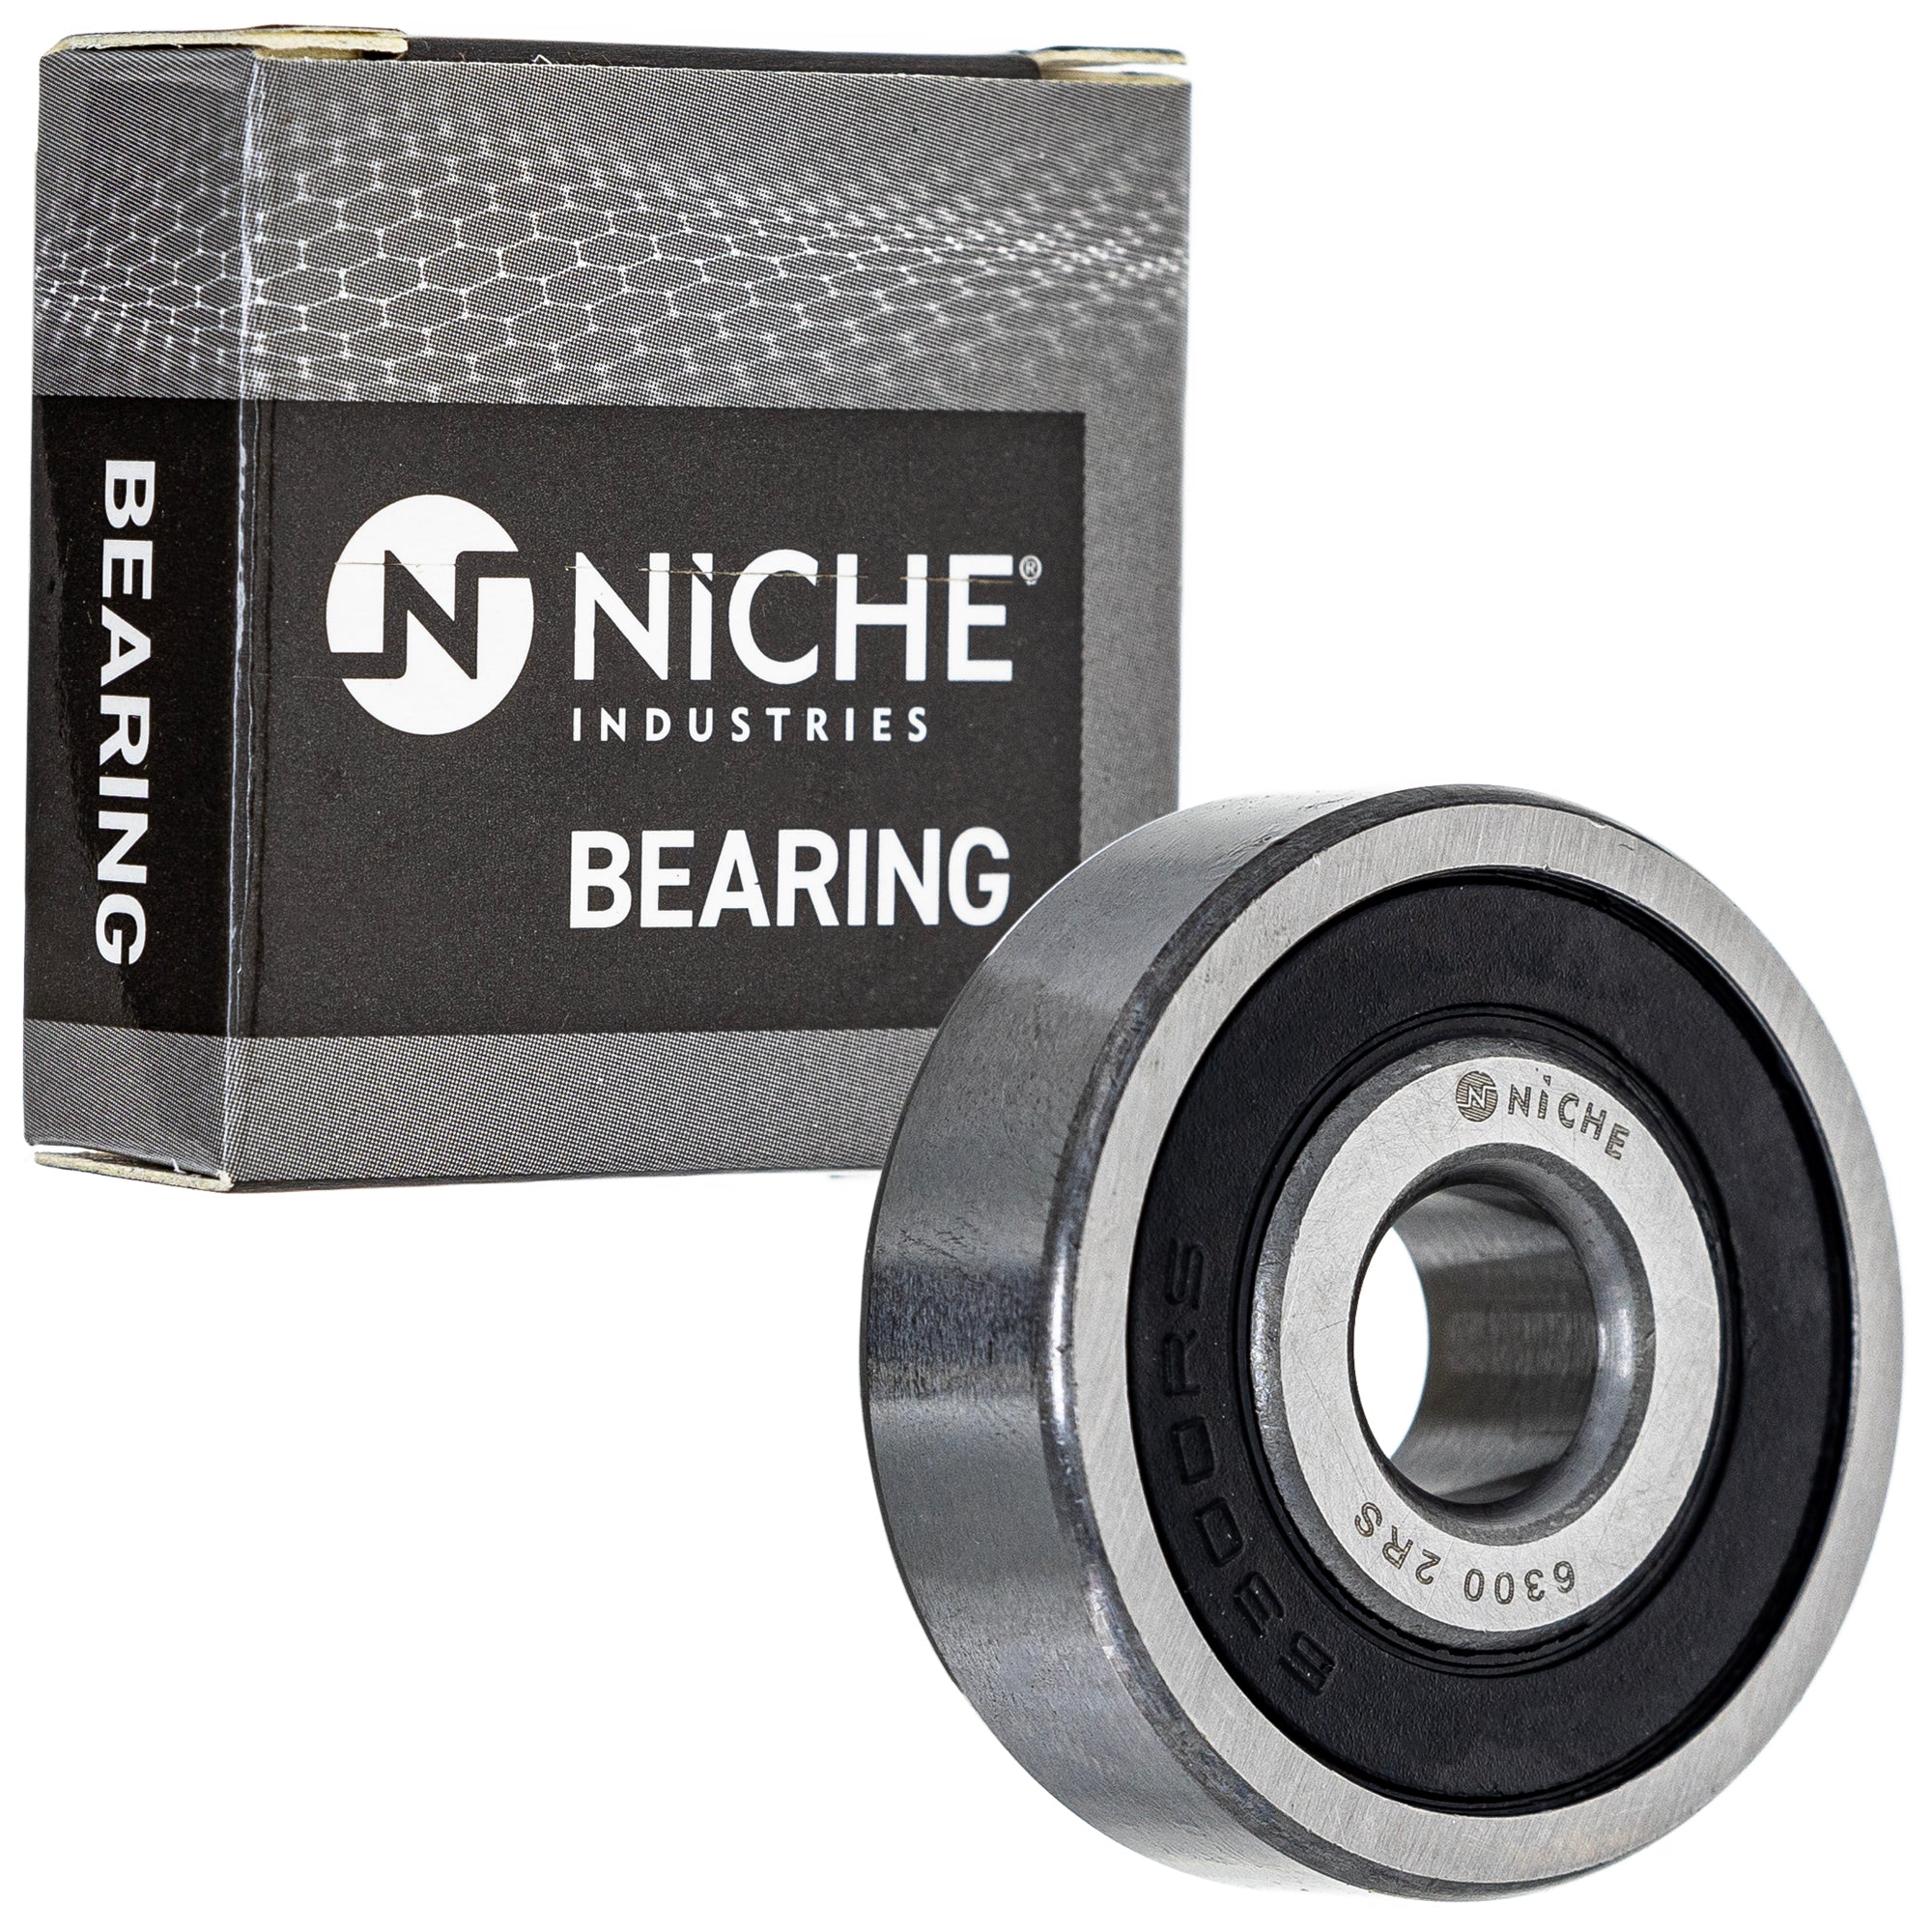 NICHE 519-CBB2265R Bearing & Seal Kit 2-Pack for zOTHER RM60 KX80